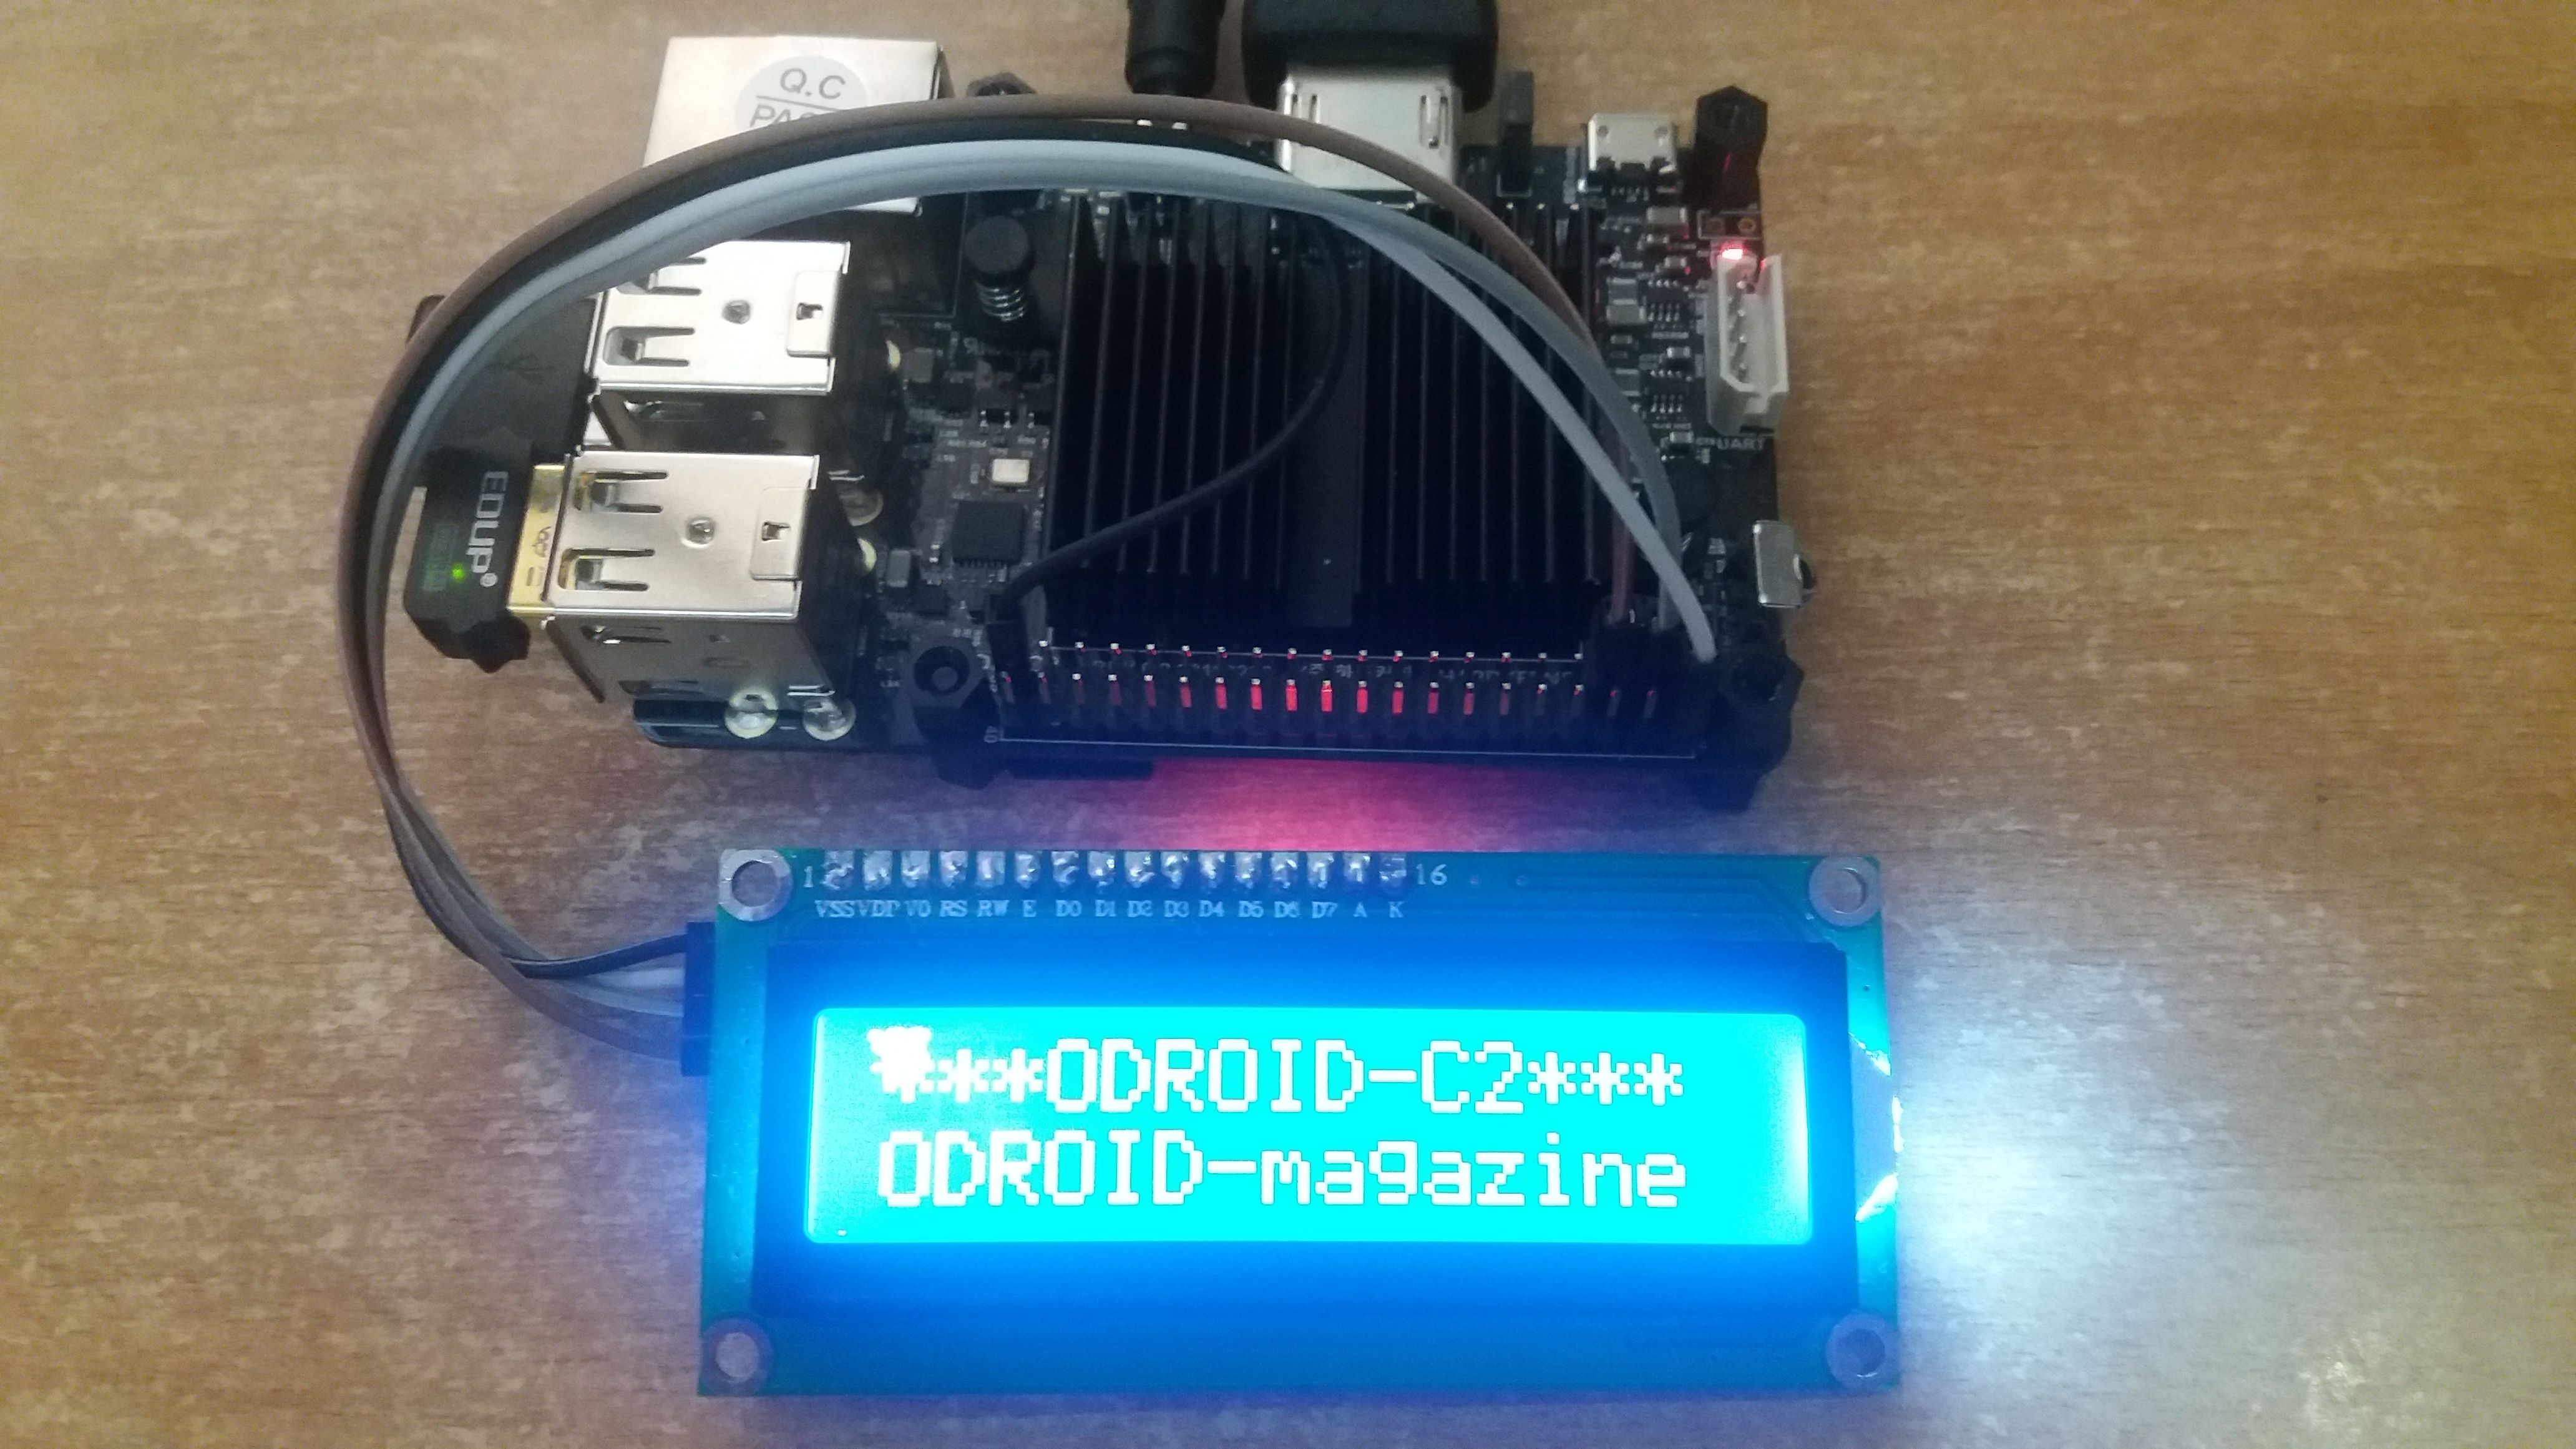 ODROID Magazine Figure 4 - LCD screen displaying a dual-line message